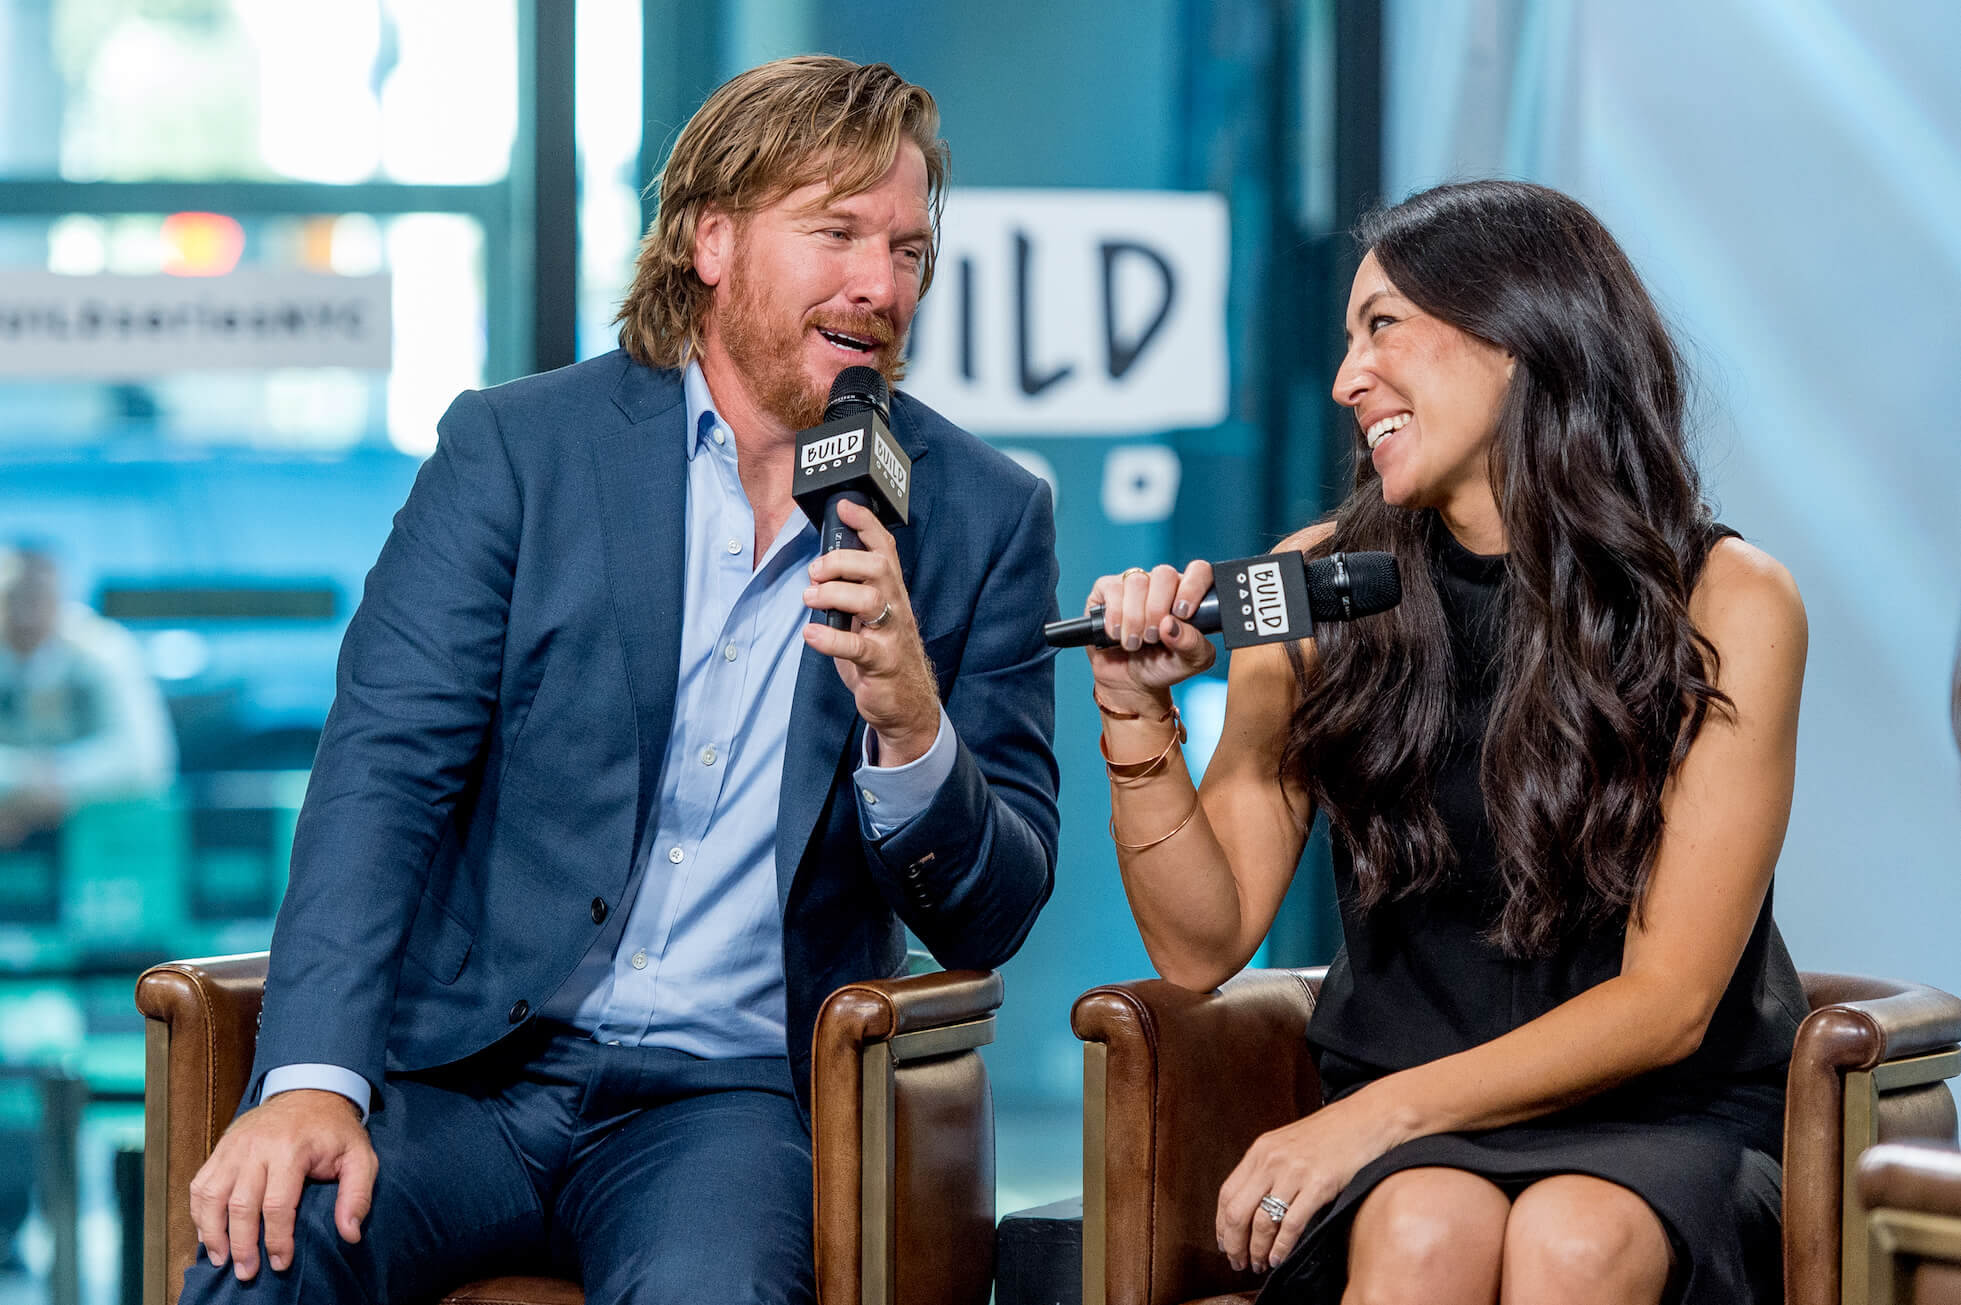 Chip and Joanna Gaines from 'Fixer Upper' speaking in an interview